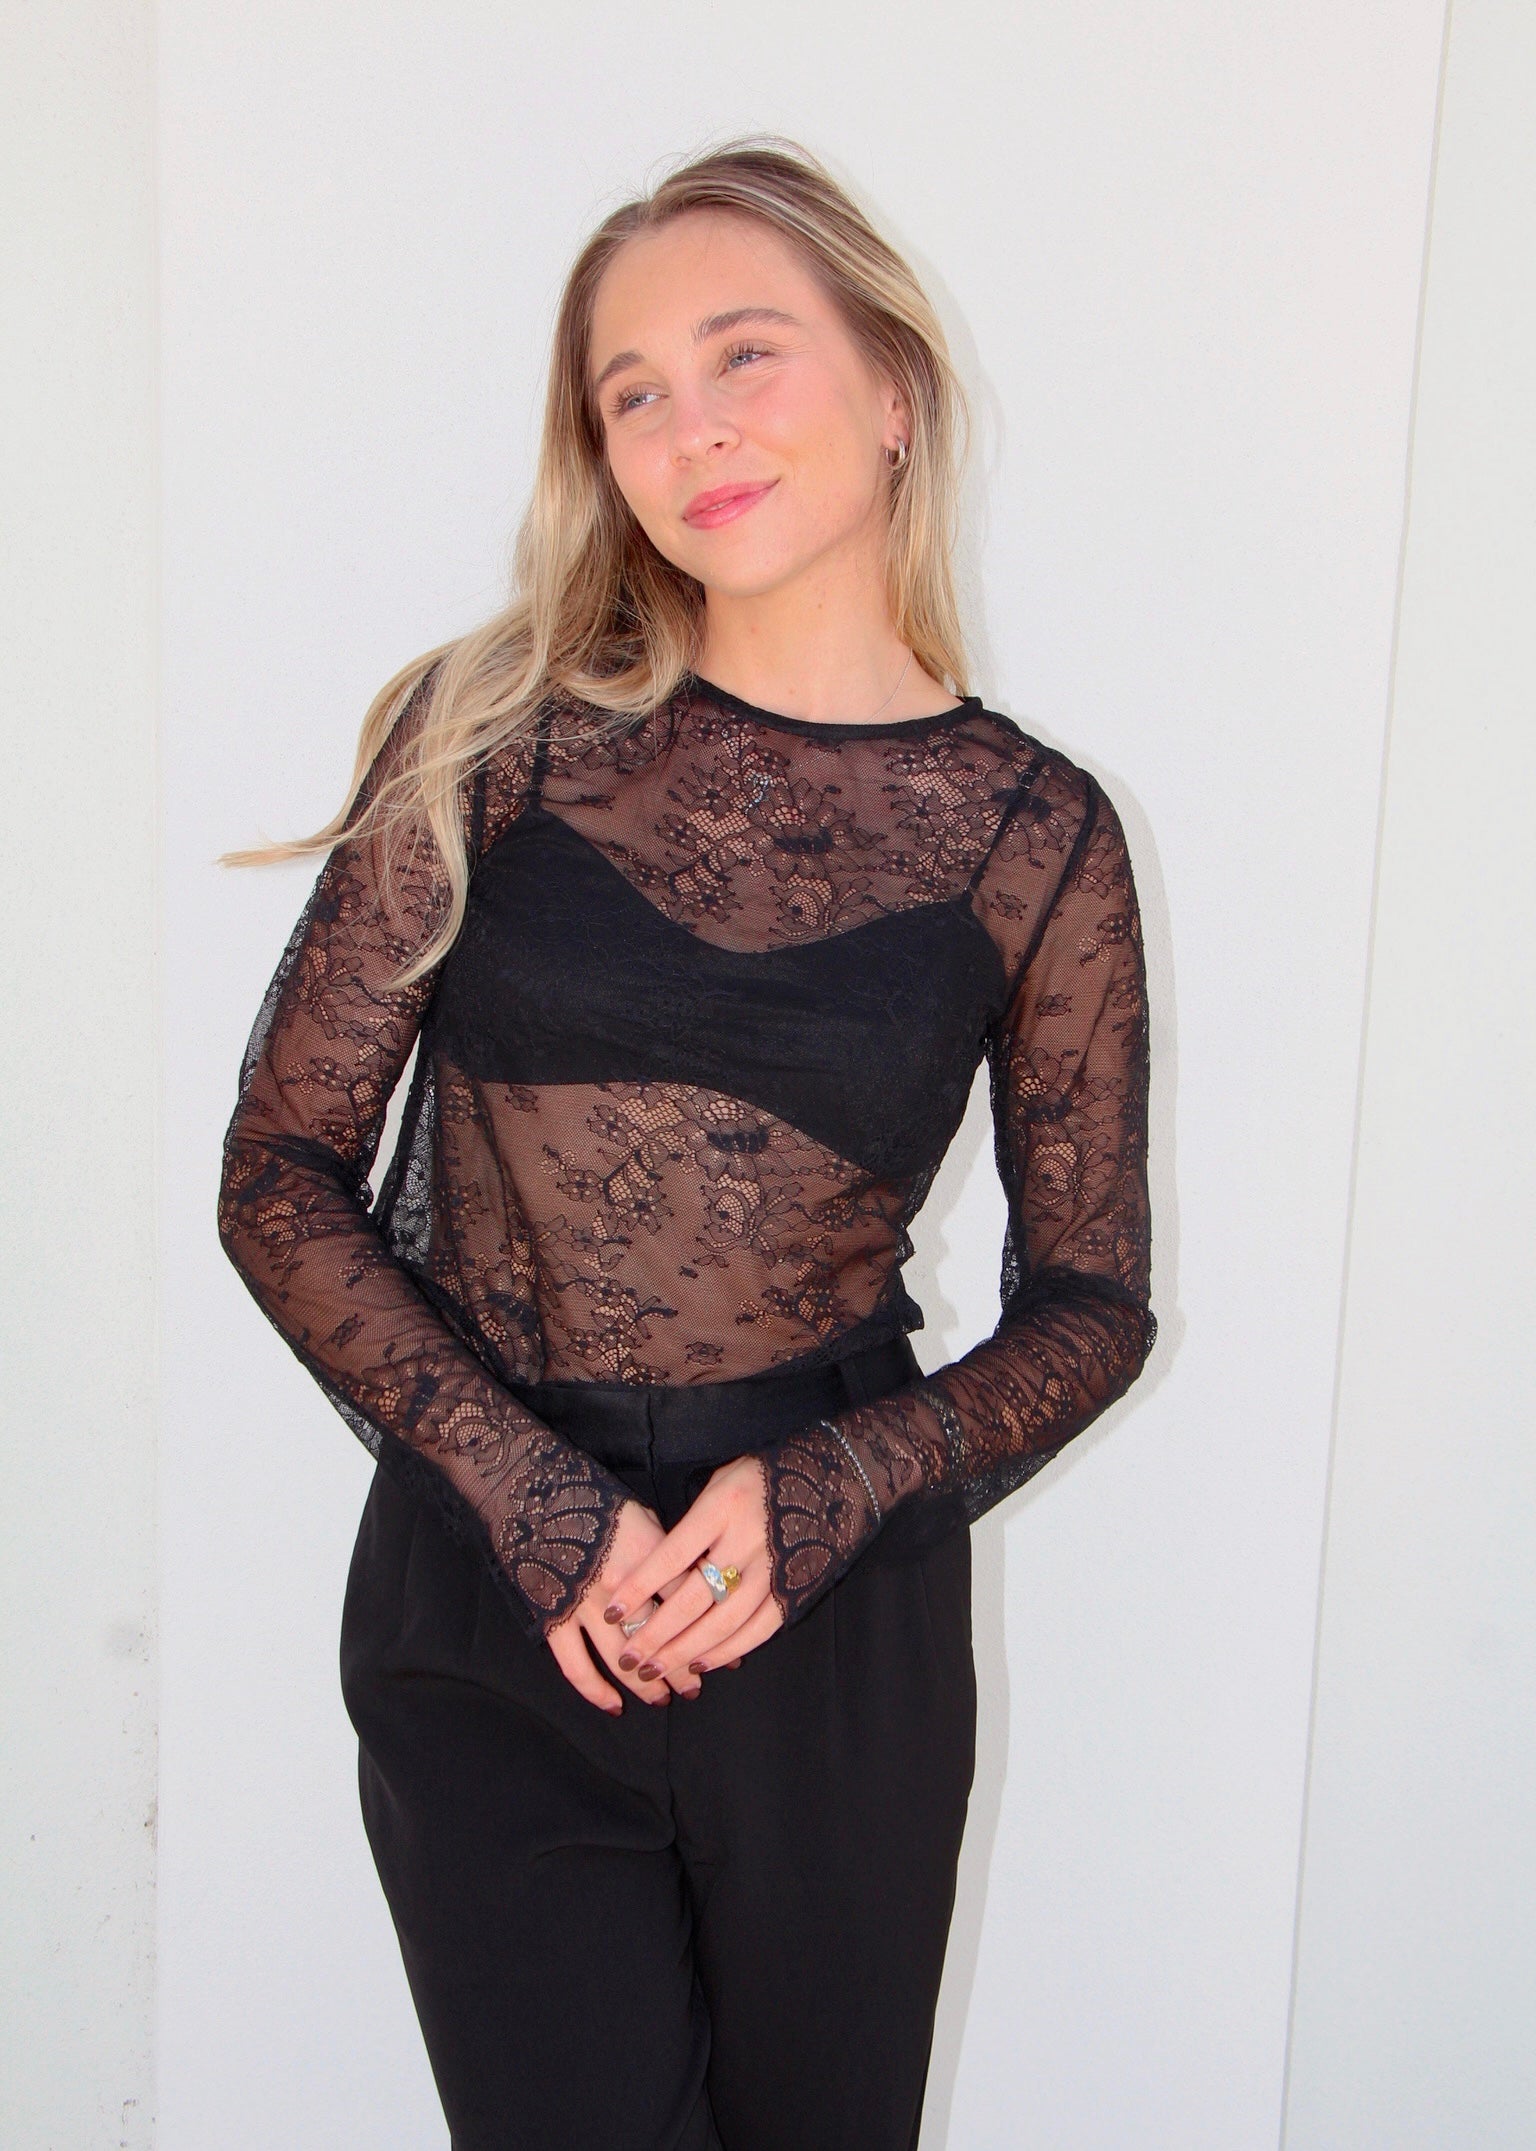 NYC Streets: Black Lace Top With Bralette